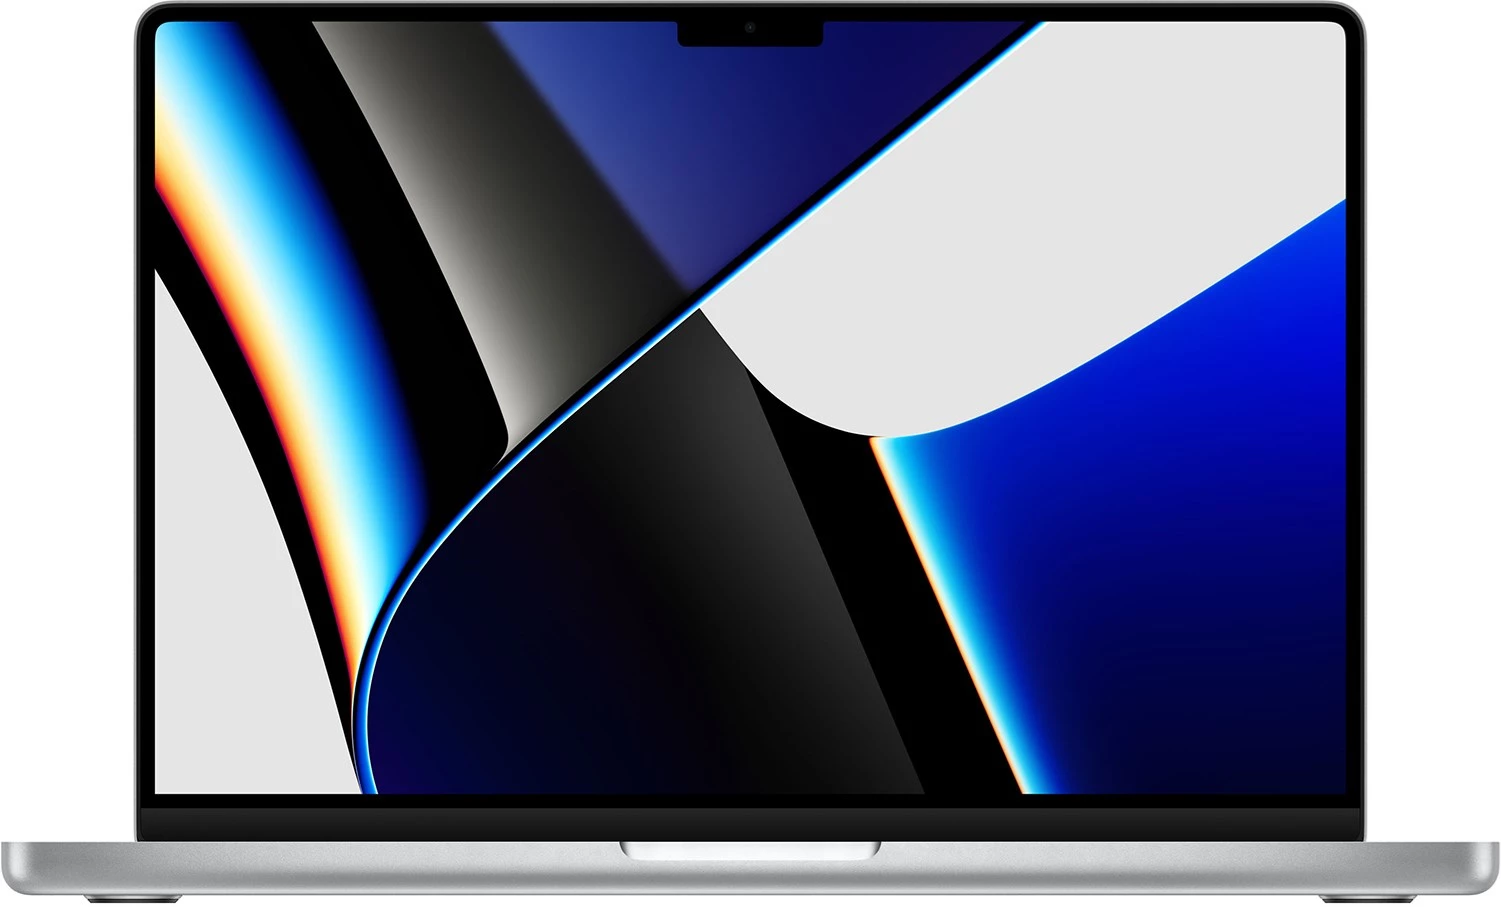 Apple 14-inch MacBook Pro: Apple M1 Pro chip with 8‑core CPU and 14‑core GPU, 512GB SSD